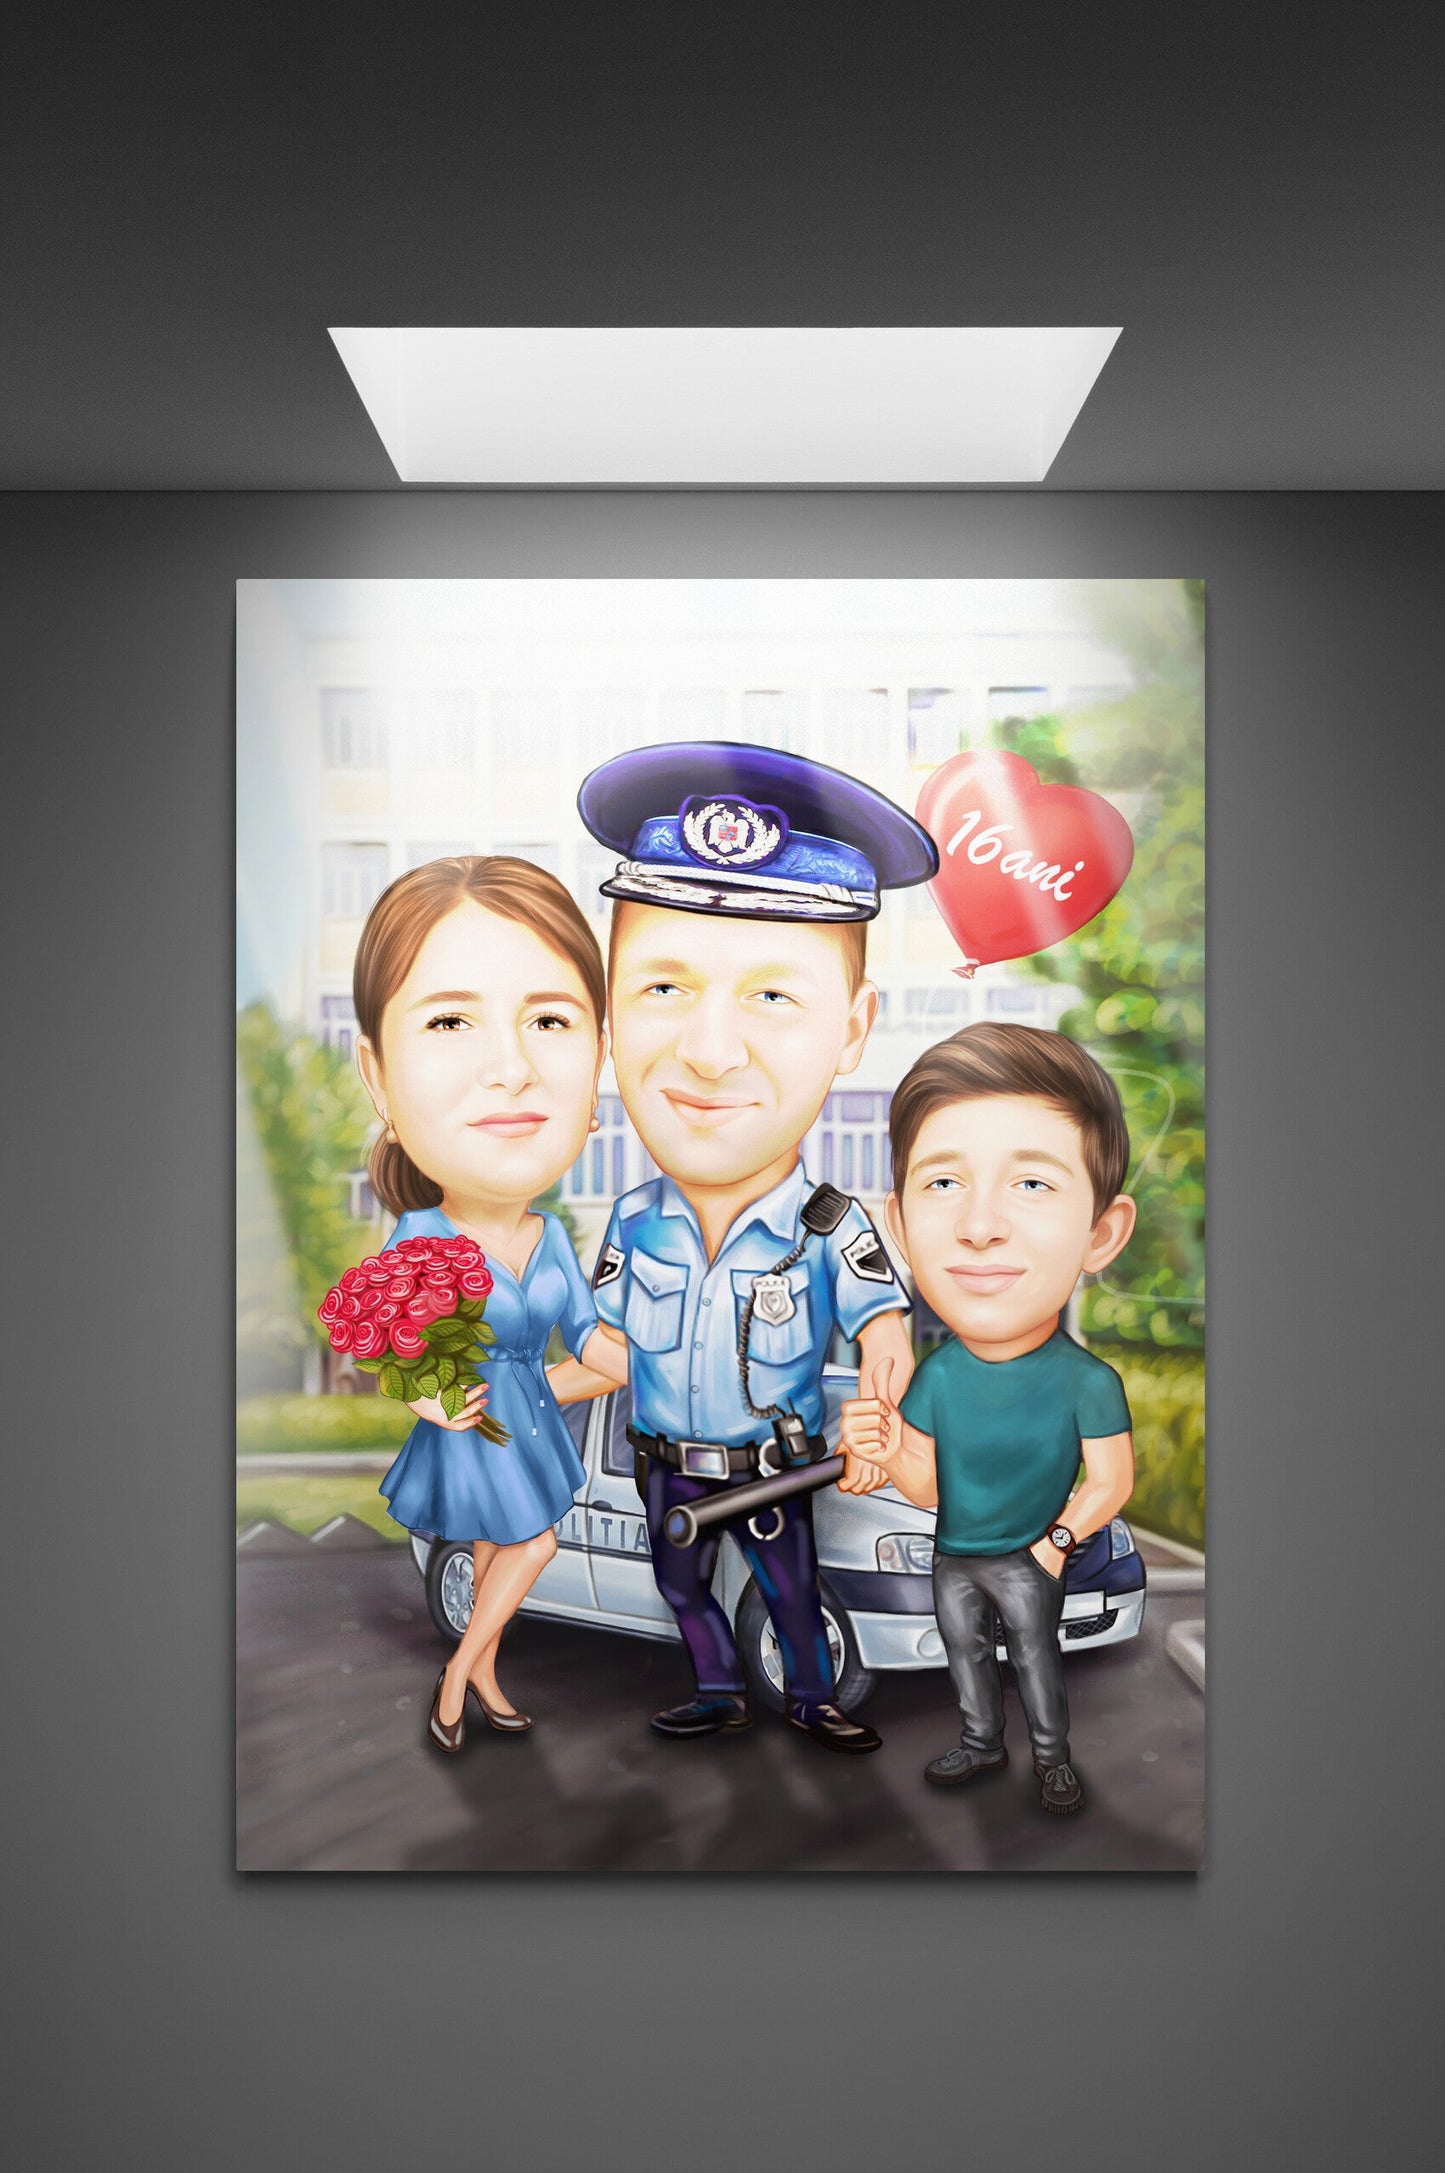 Policeman 16 years of relationship anniversary family caricature